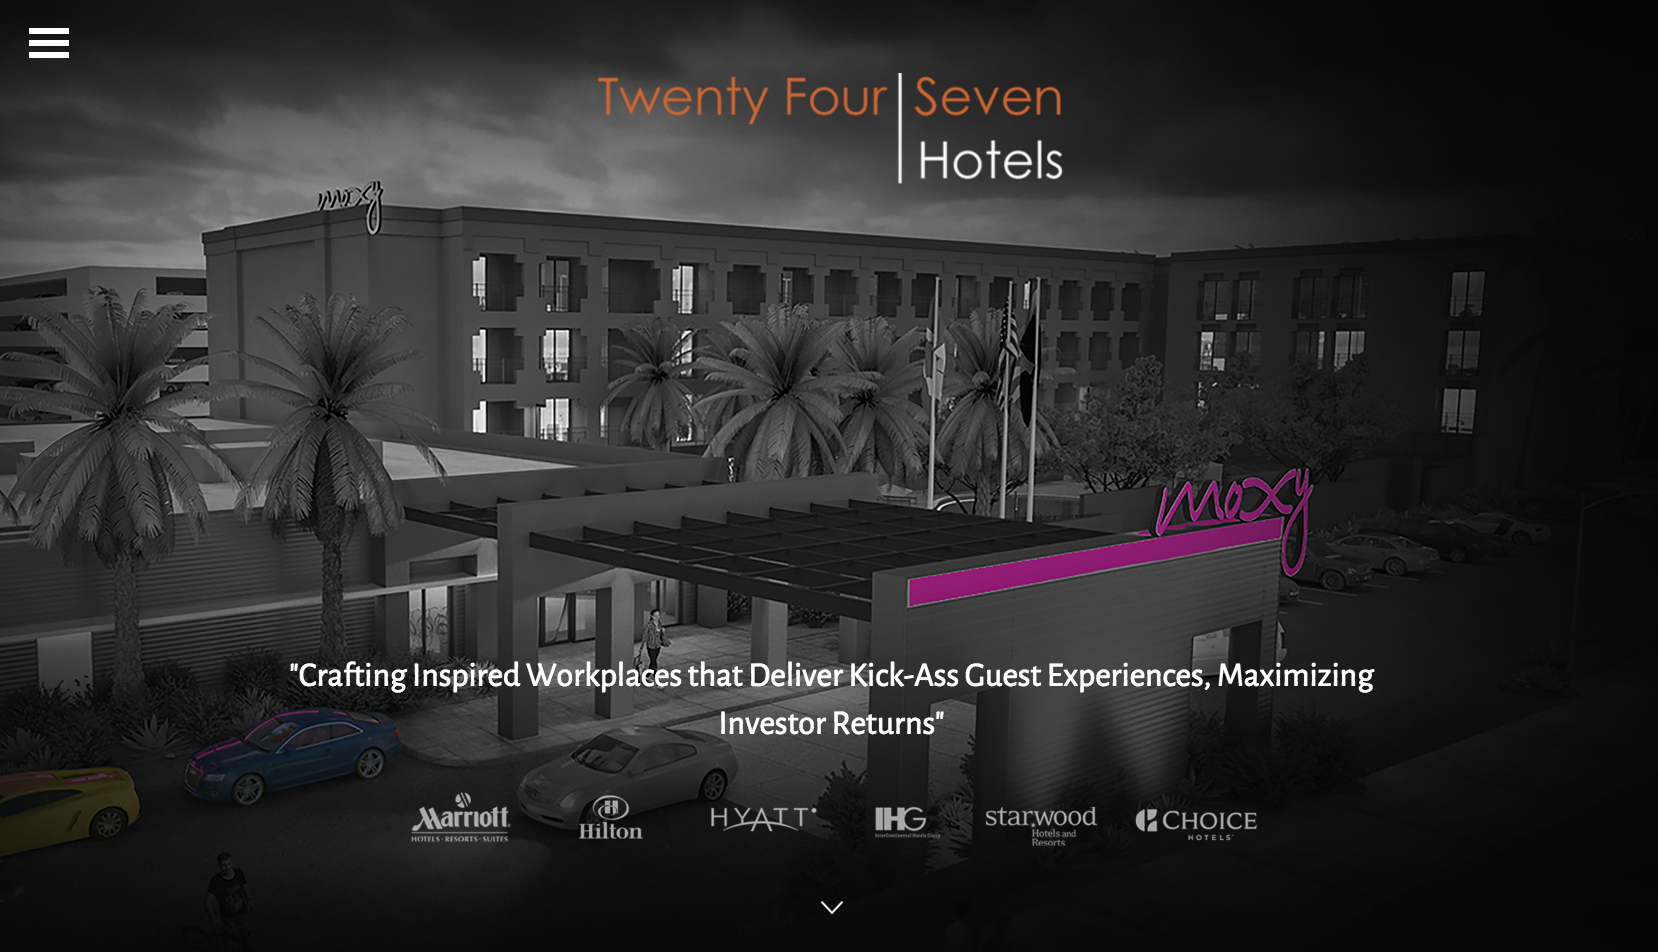 Twenty Four Seven Hotels Home - Another Awesome qualiant Branding Project